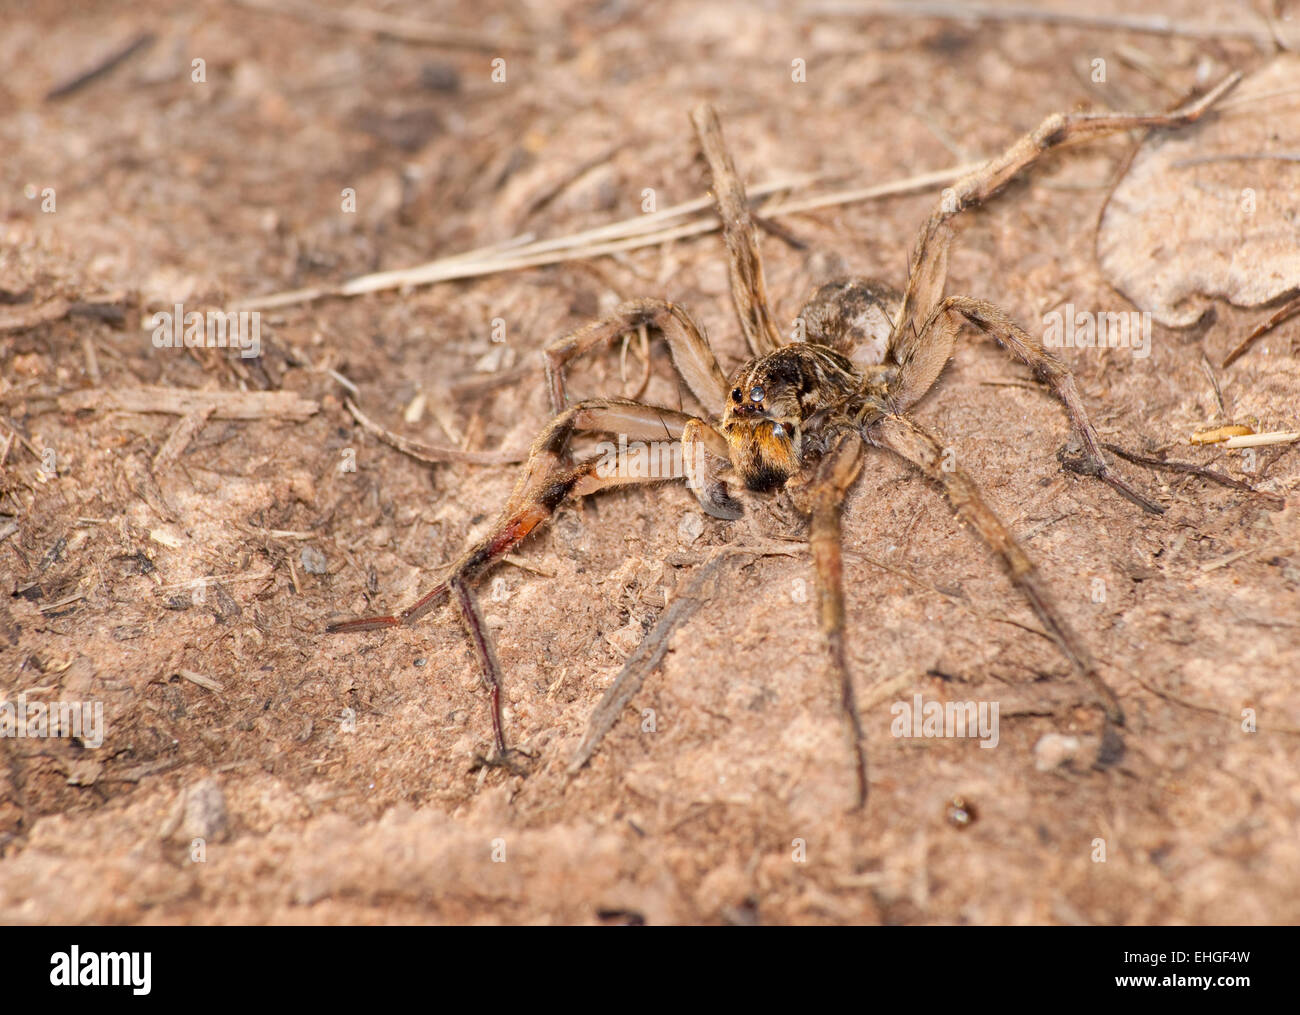 Burrowing Wolf Spider, Geolycosa, in its natural environment Stock Photo